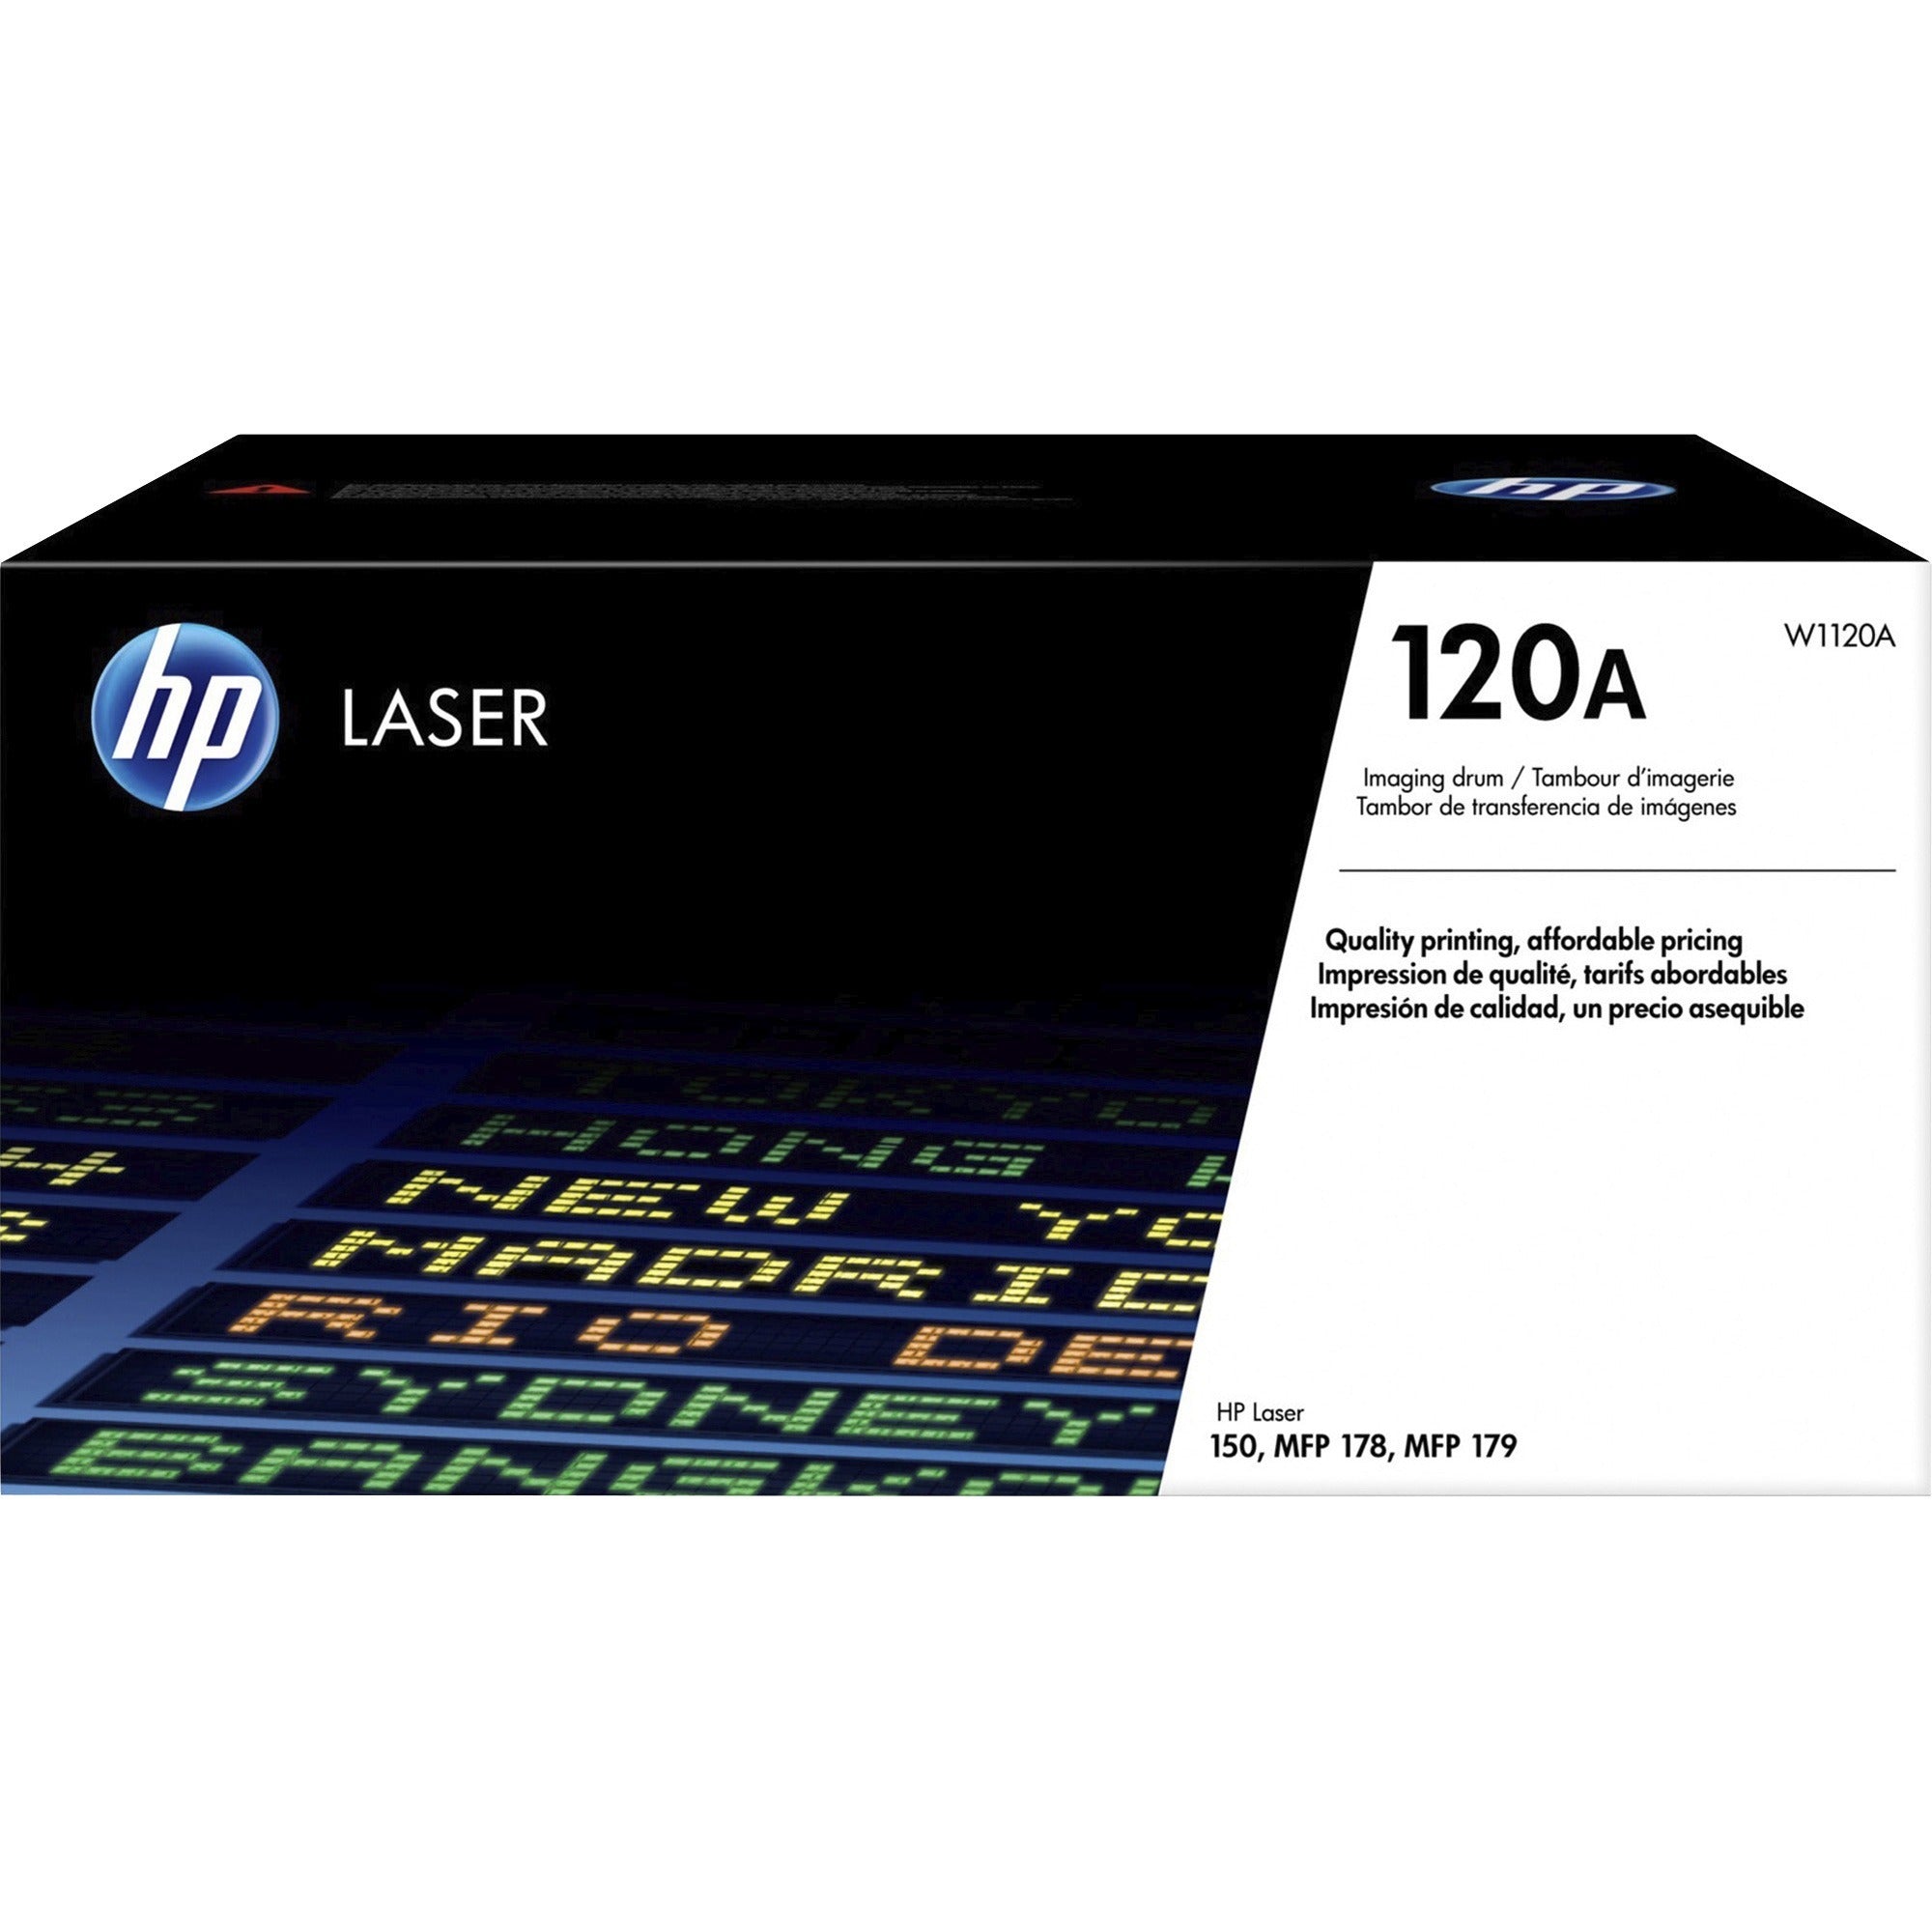 hp-120a-original-laser-imaging-drum-laser-print-technology-16000-pages-1-each-color_heww1120a - 1